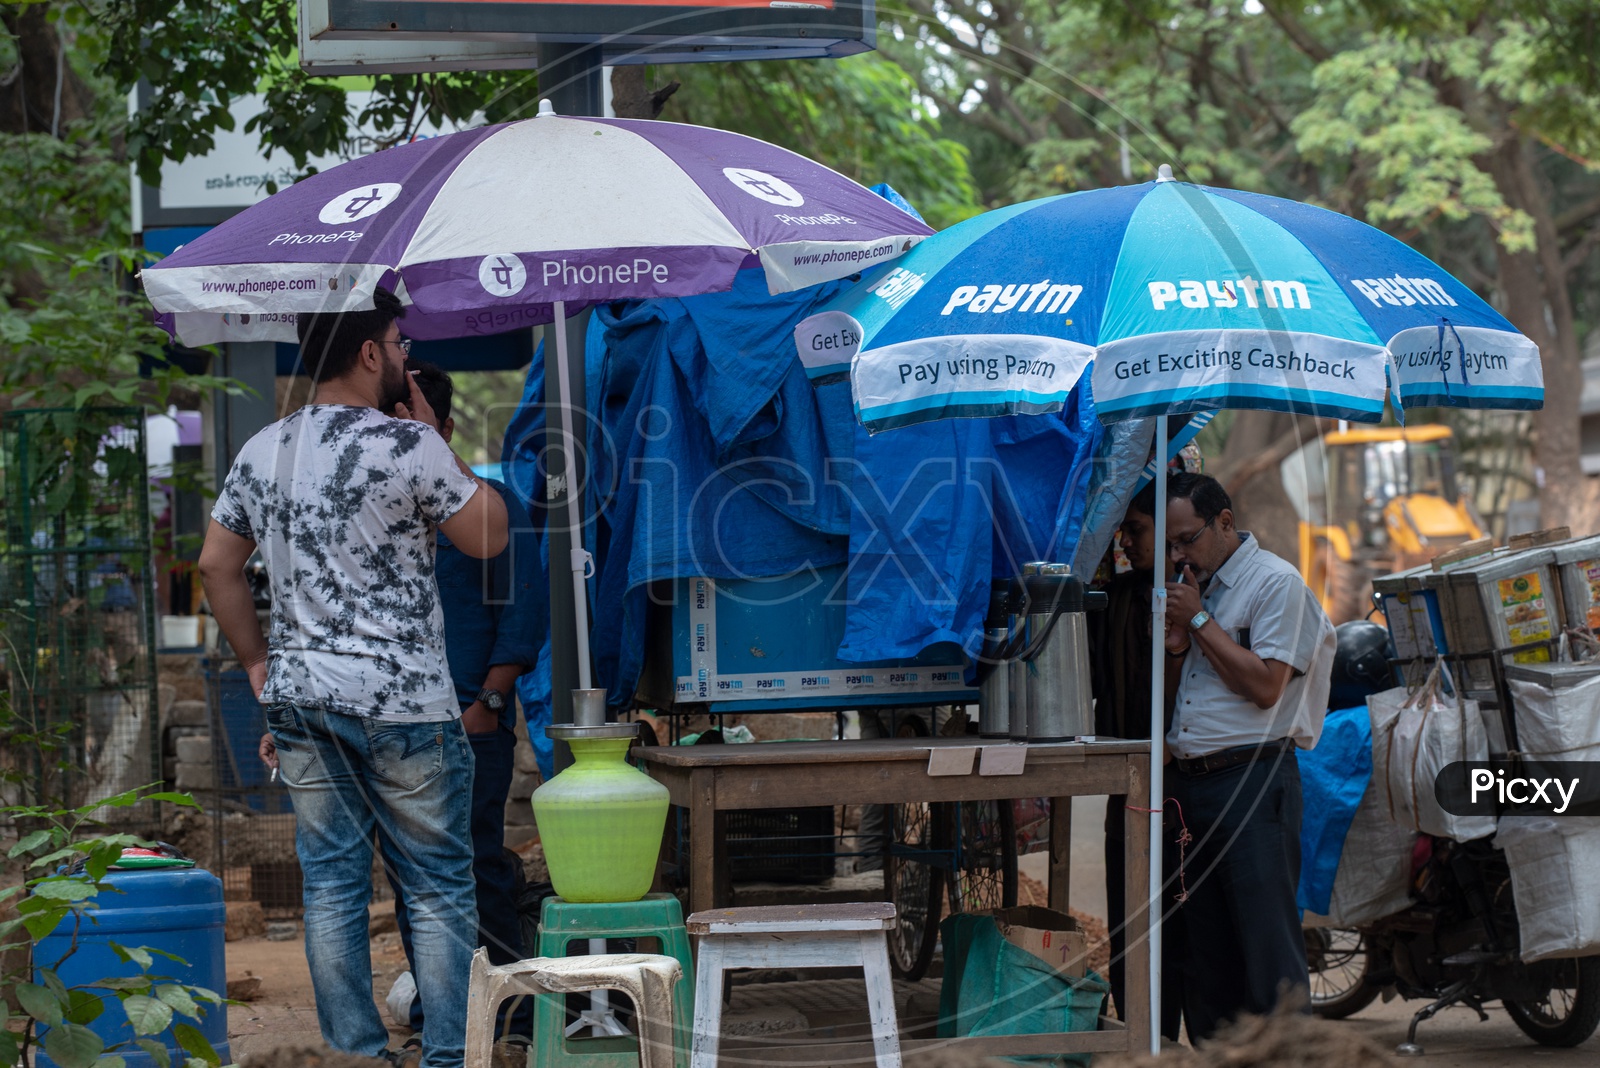 Phonepe paytm promotional umbrellas at pit shops in Bangalore city